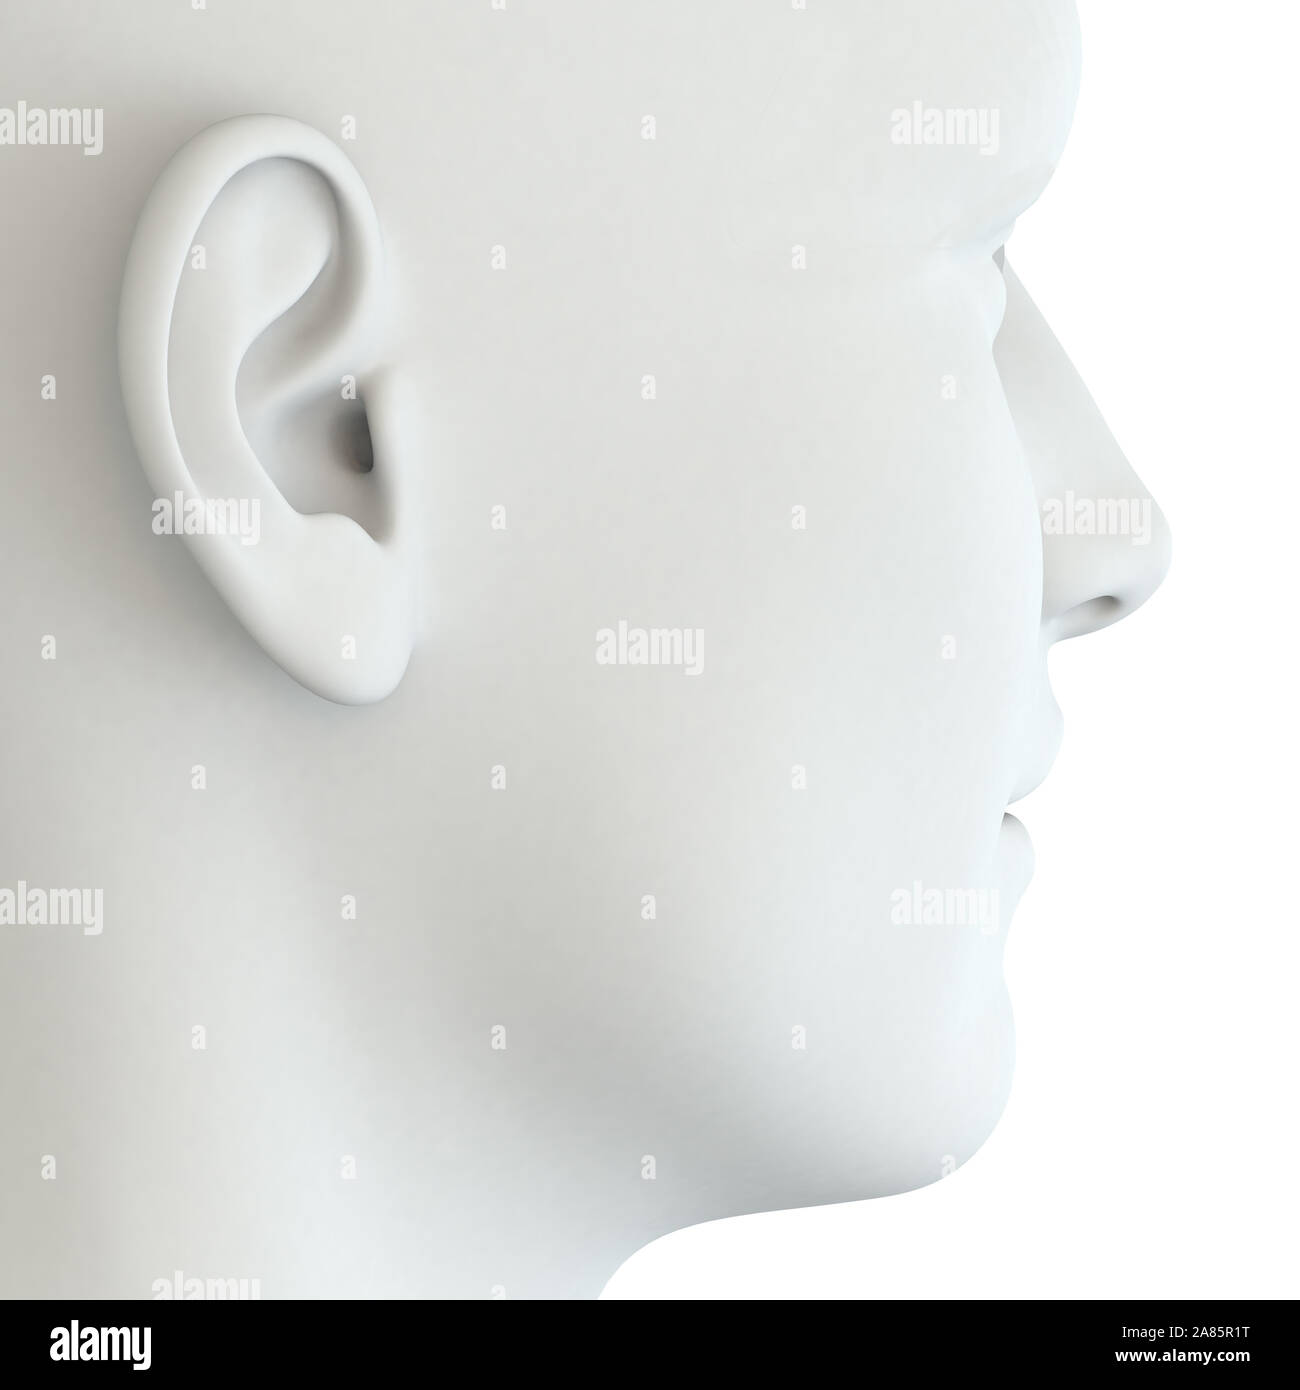 3D illustration showing human ear of a man Stock Photo